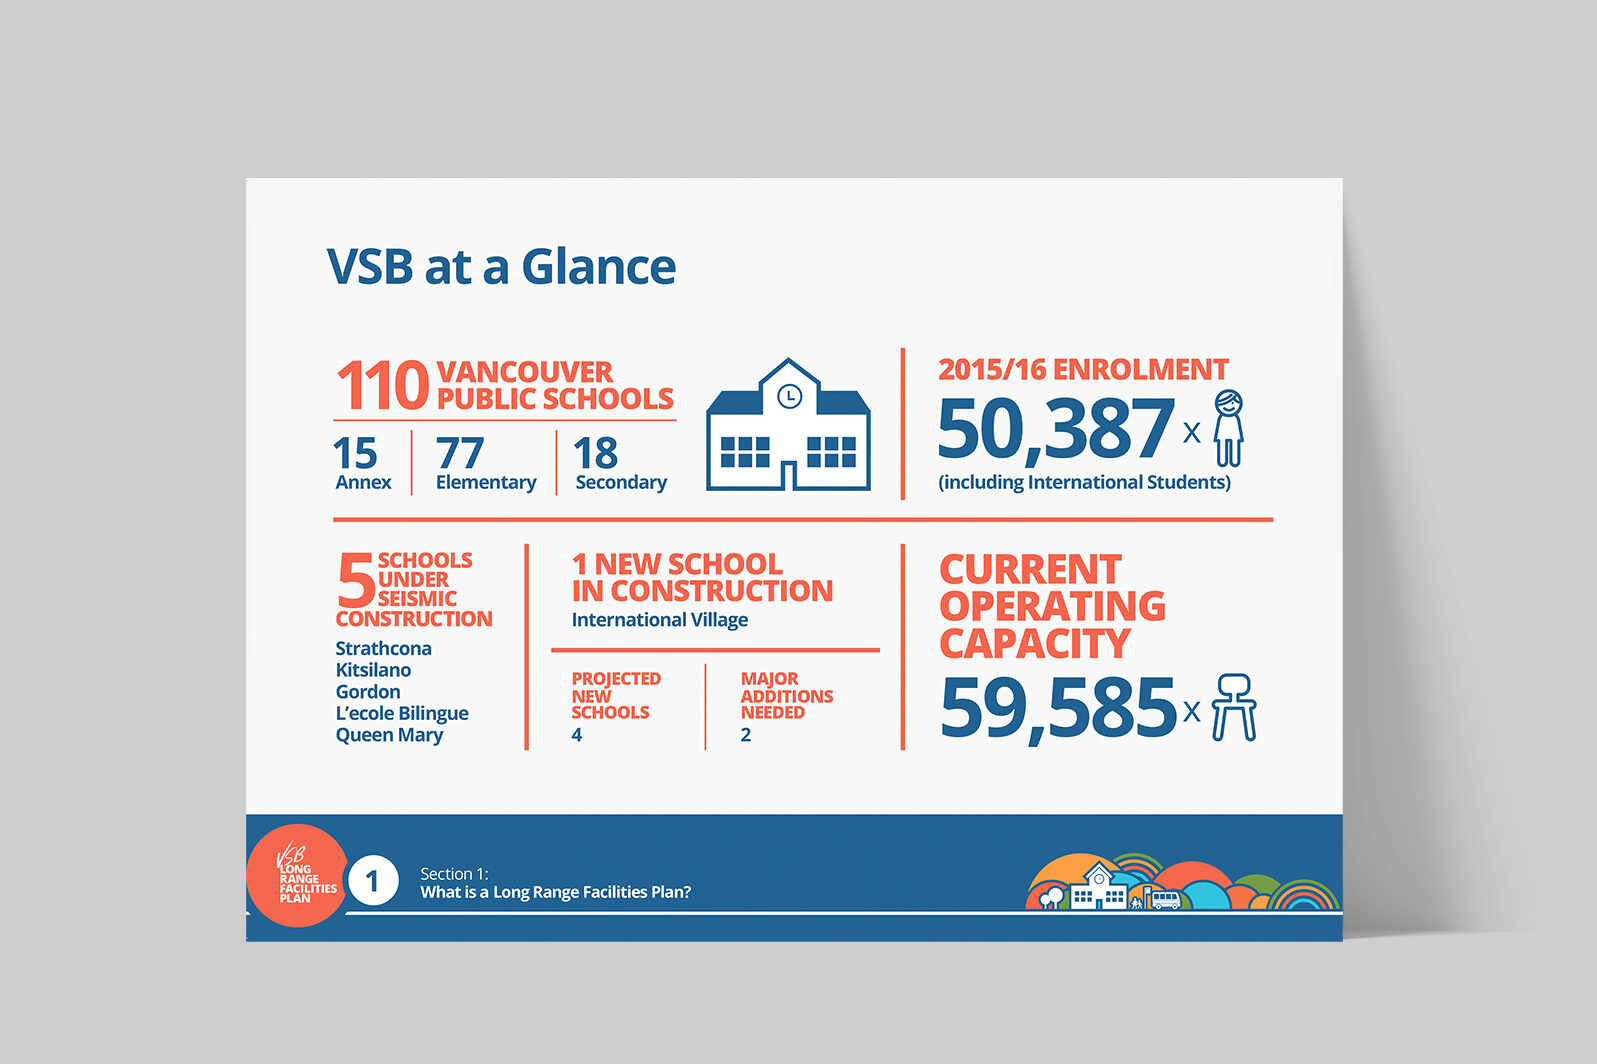 An Open house board that says "VSB at a Glance". It outlines information using statistics.